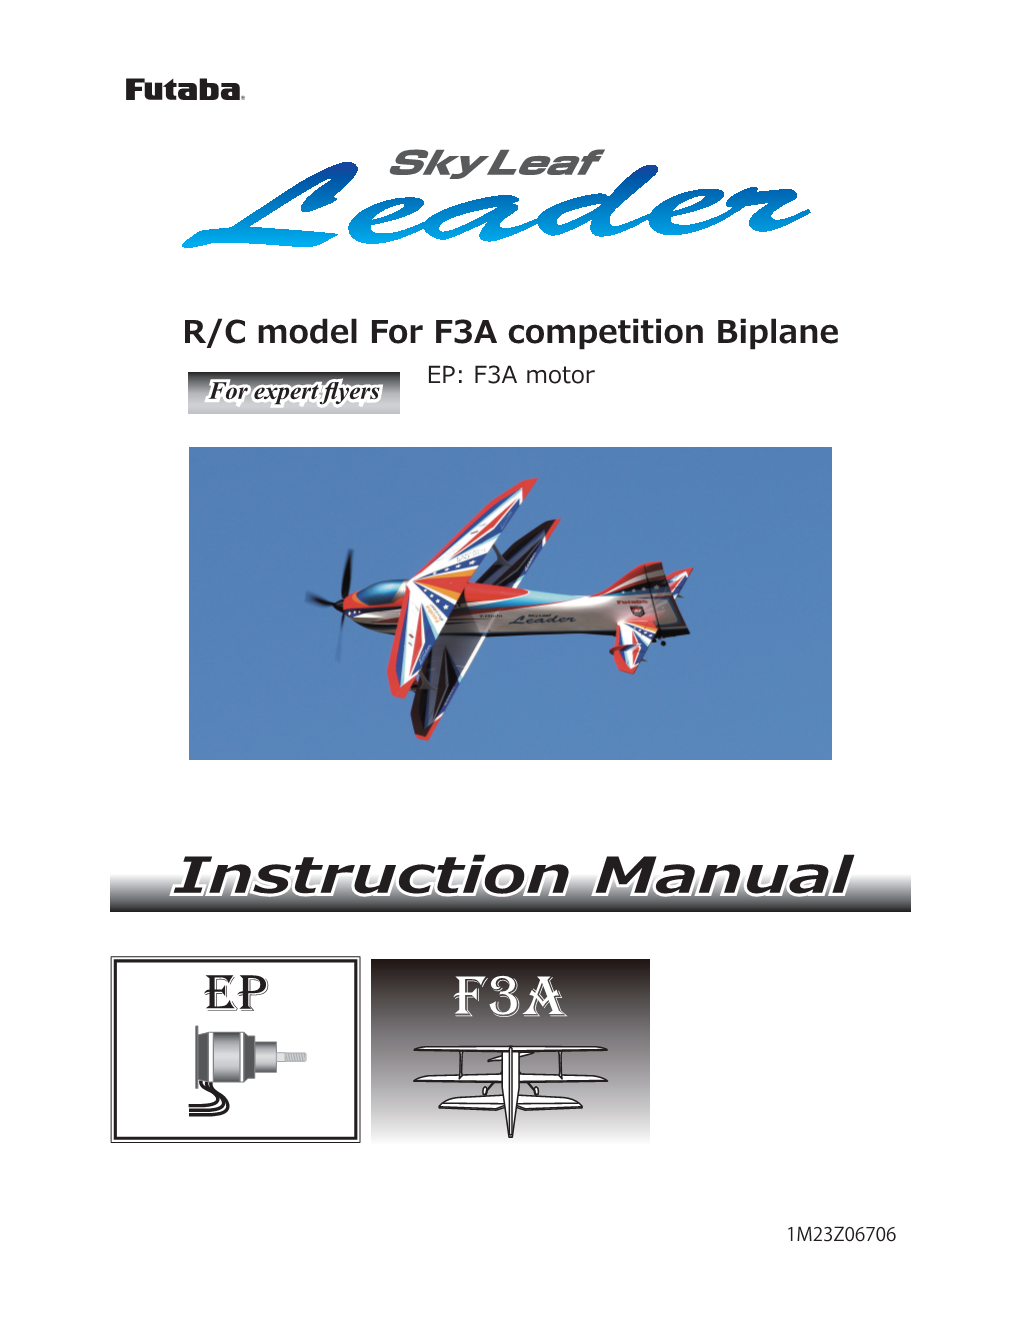 R/C Model for F3A Competition Biplane